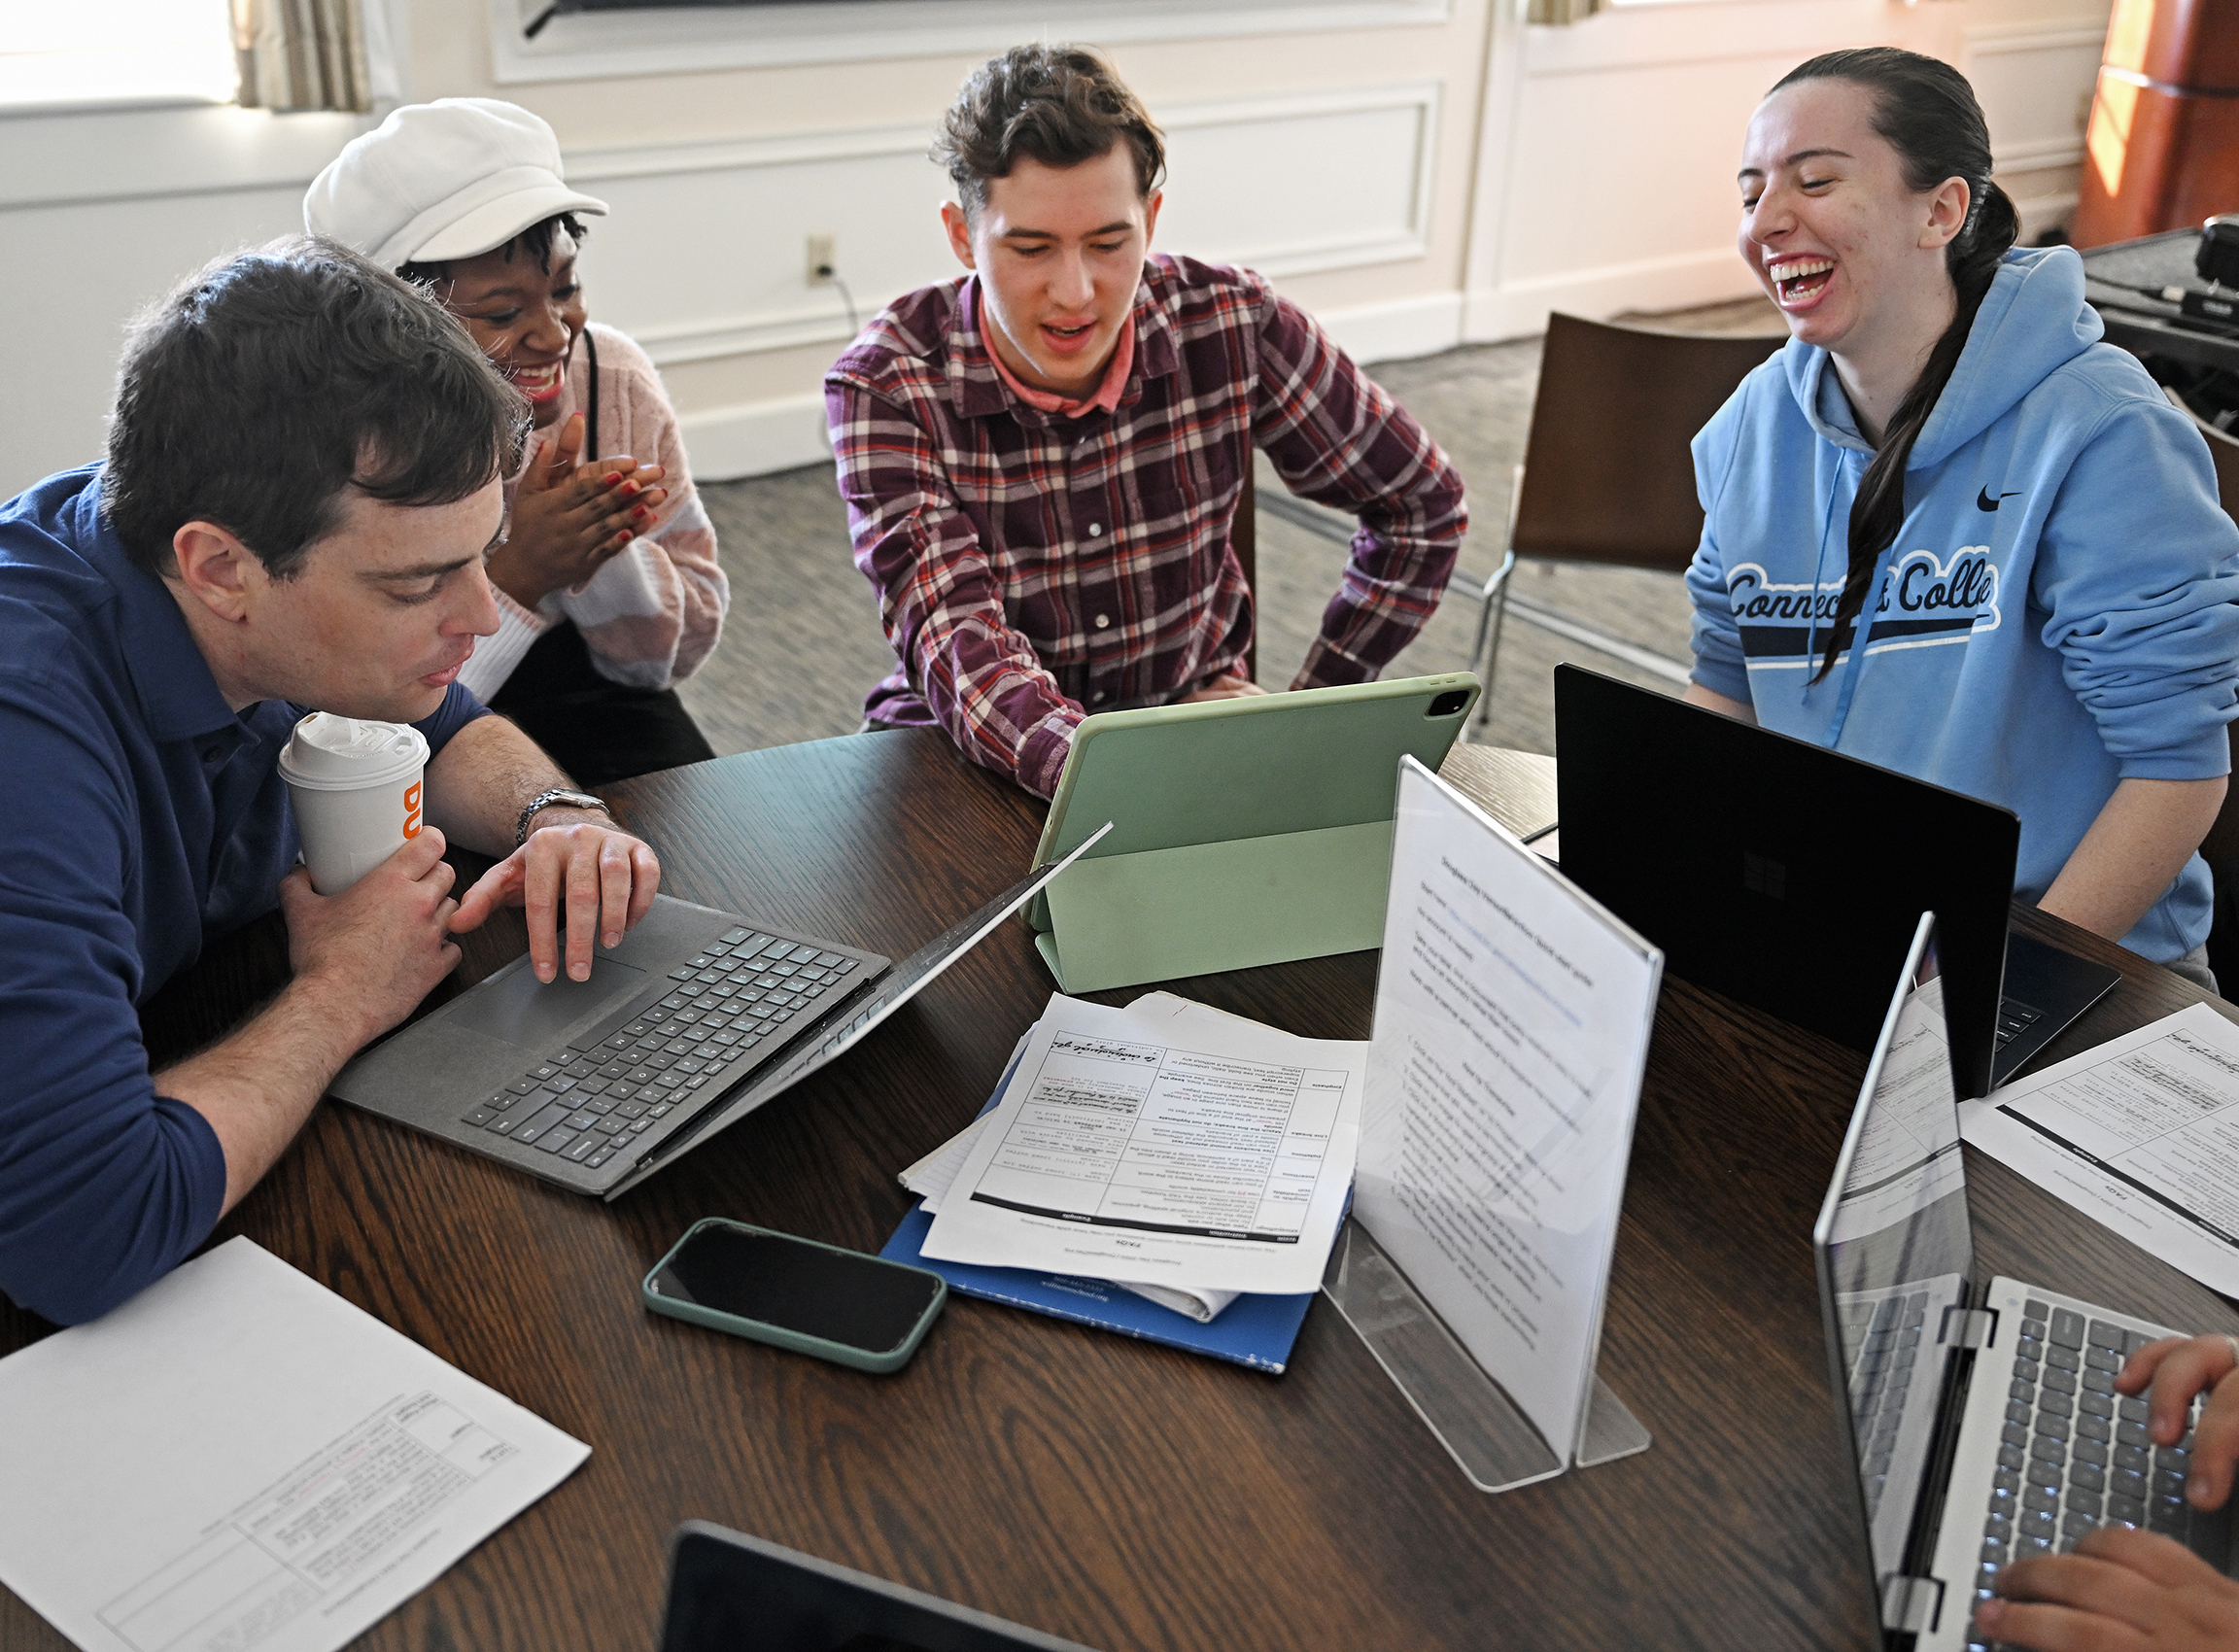 students and professor gather around laptop computer